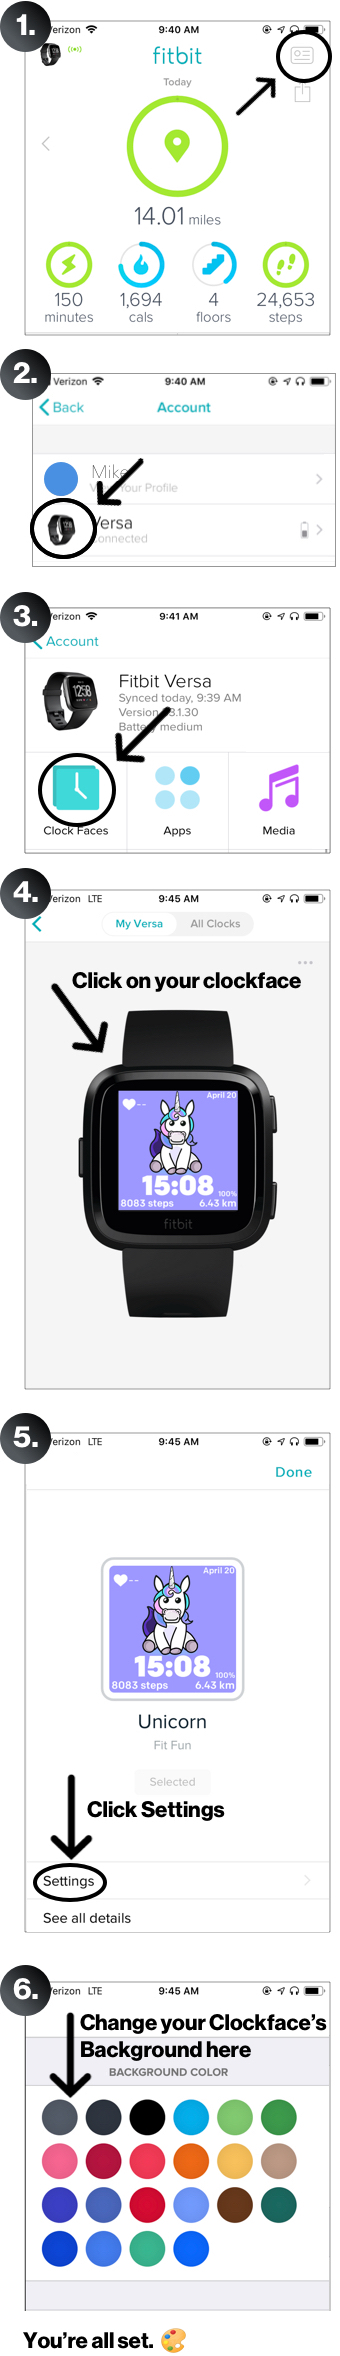 How to Change Your Fitbit Versa Ionic 